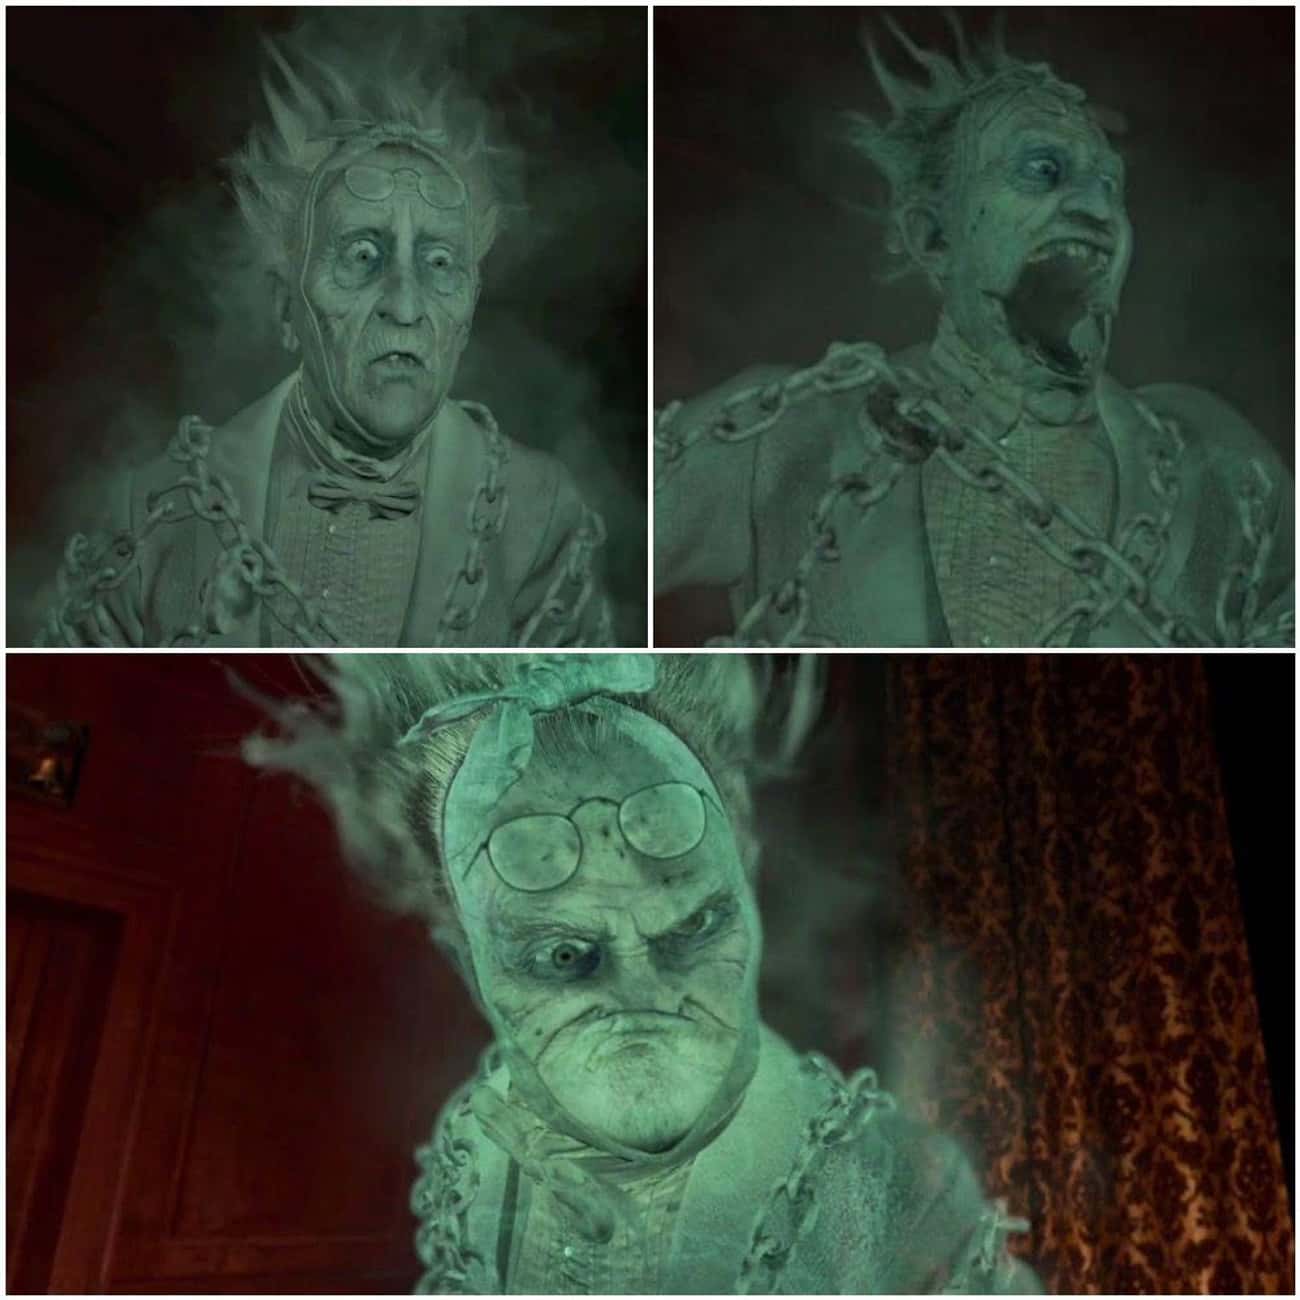 Jacob Marley Visits Scrooge As A Decaying Ghost In 'A Christmas Carol'